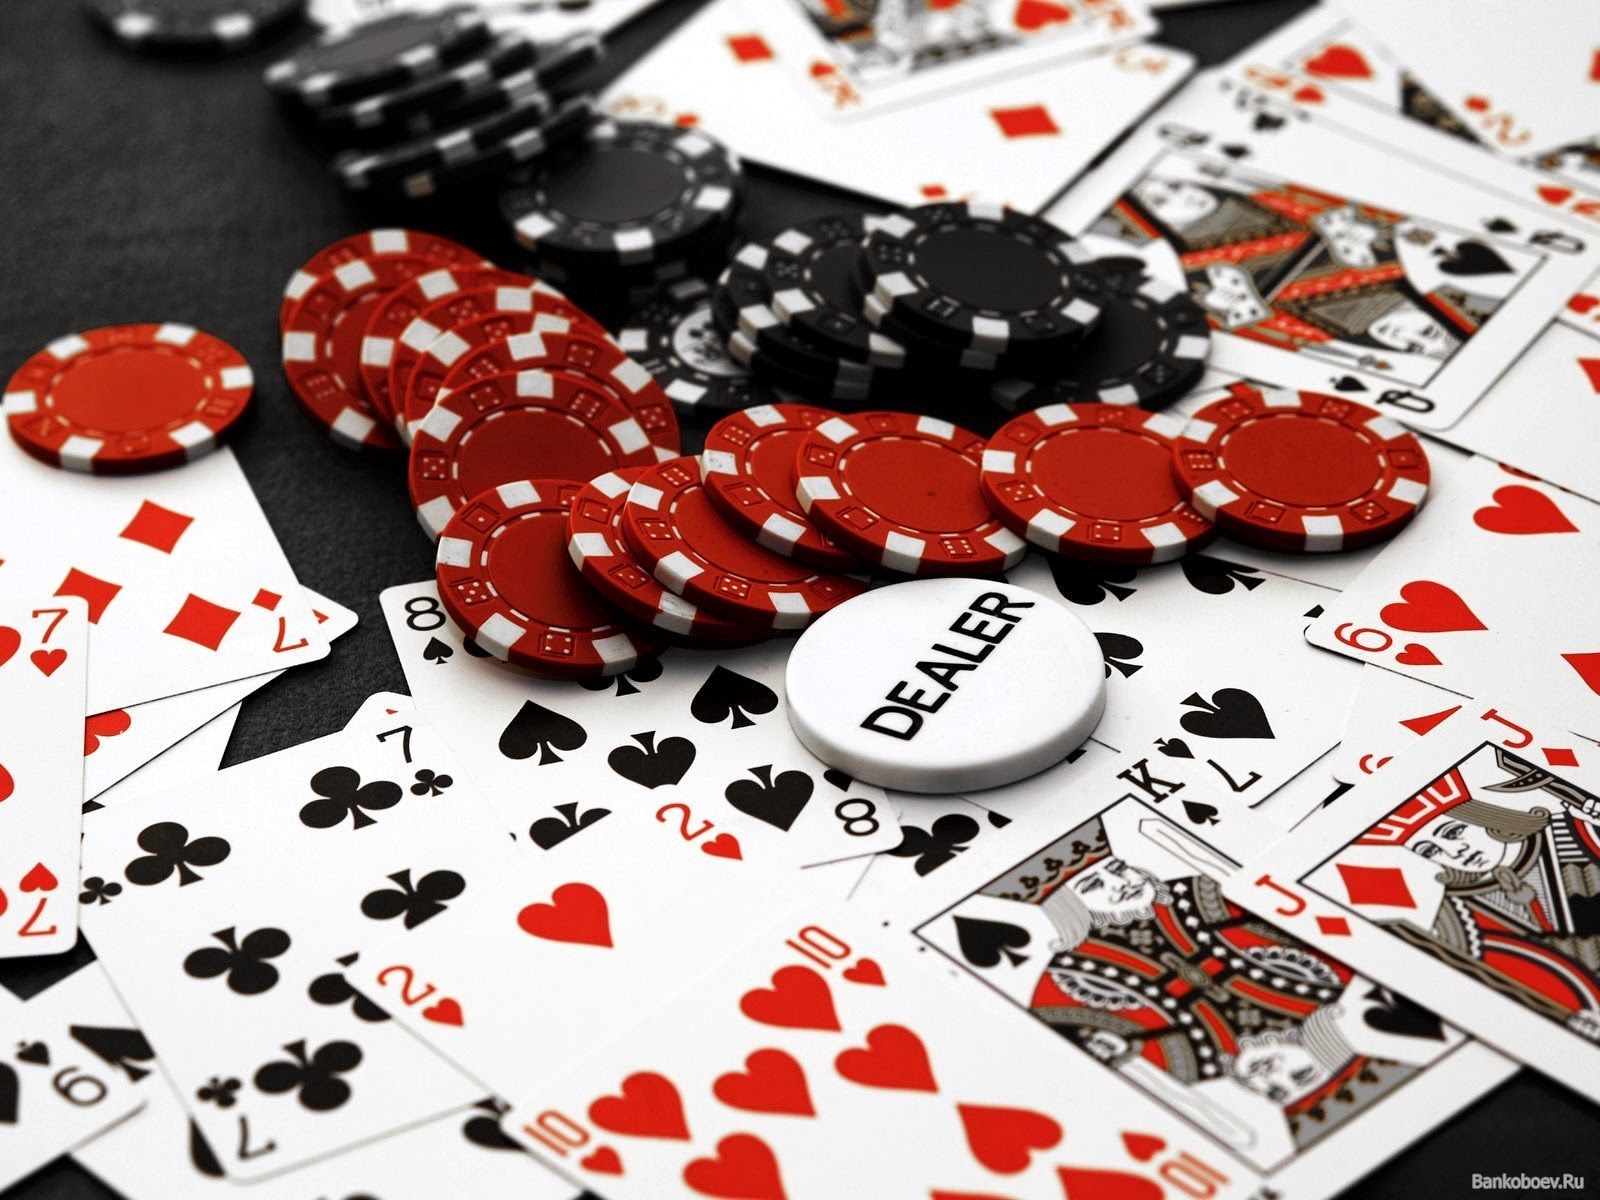 There are three ways to win more in online casinos